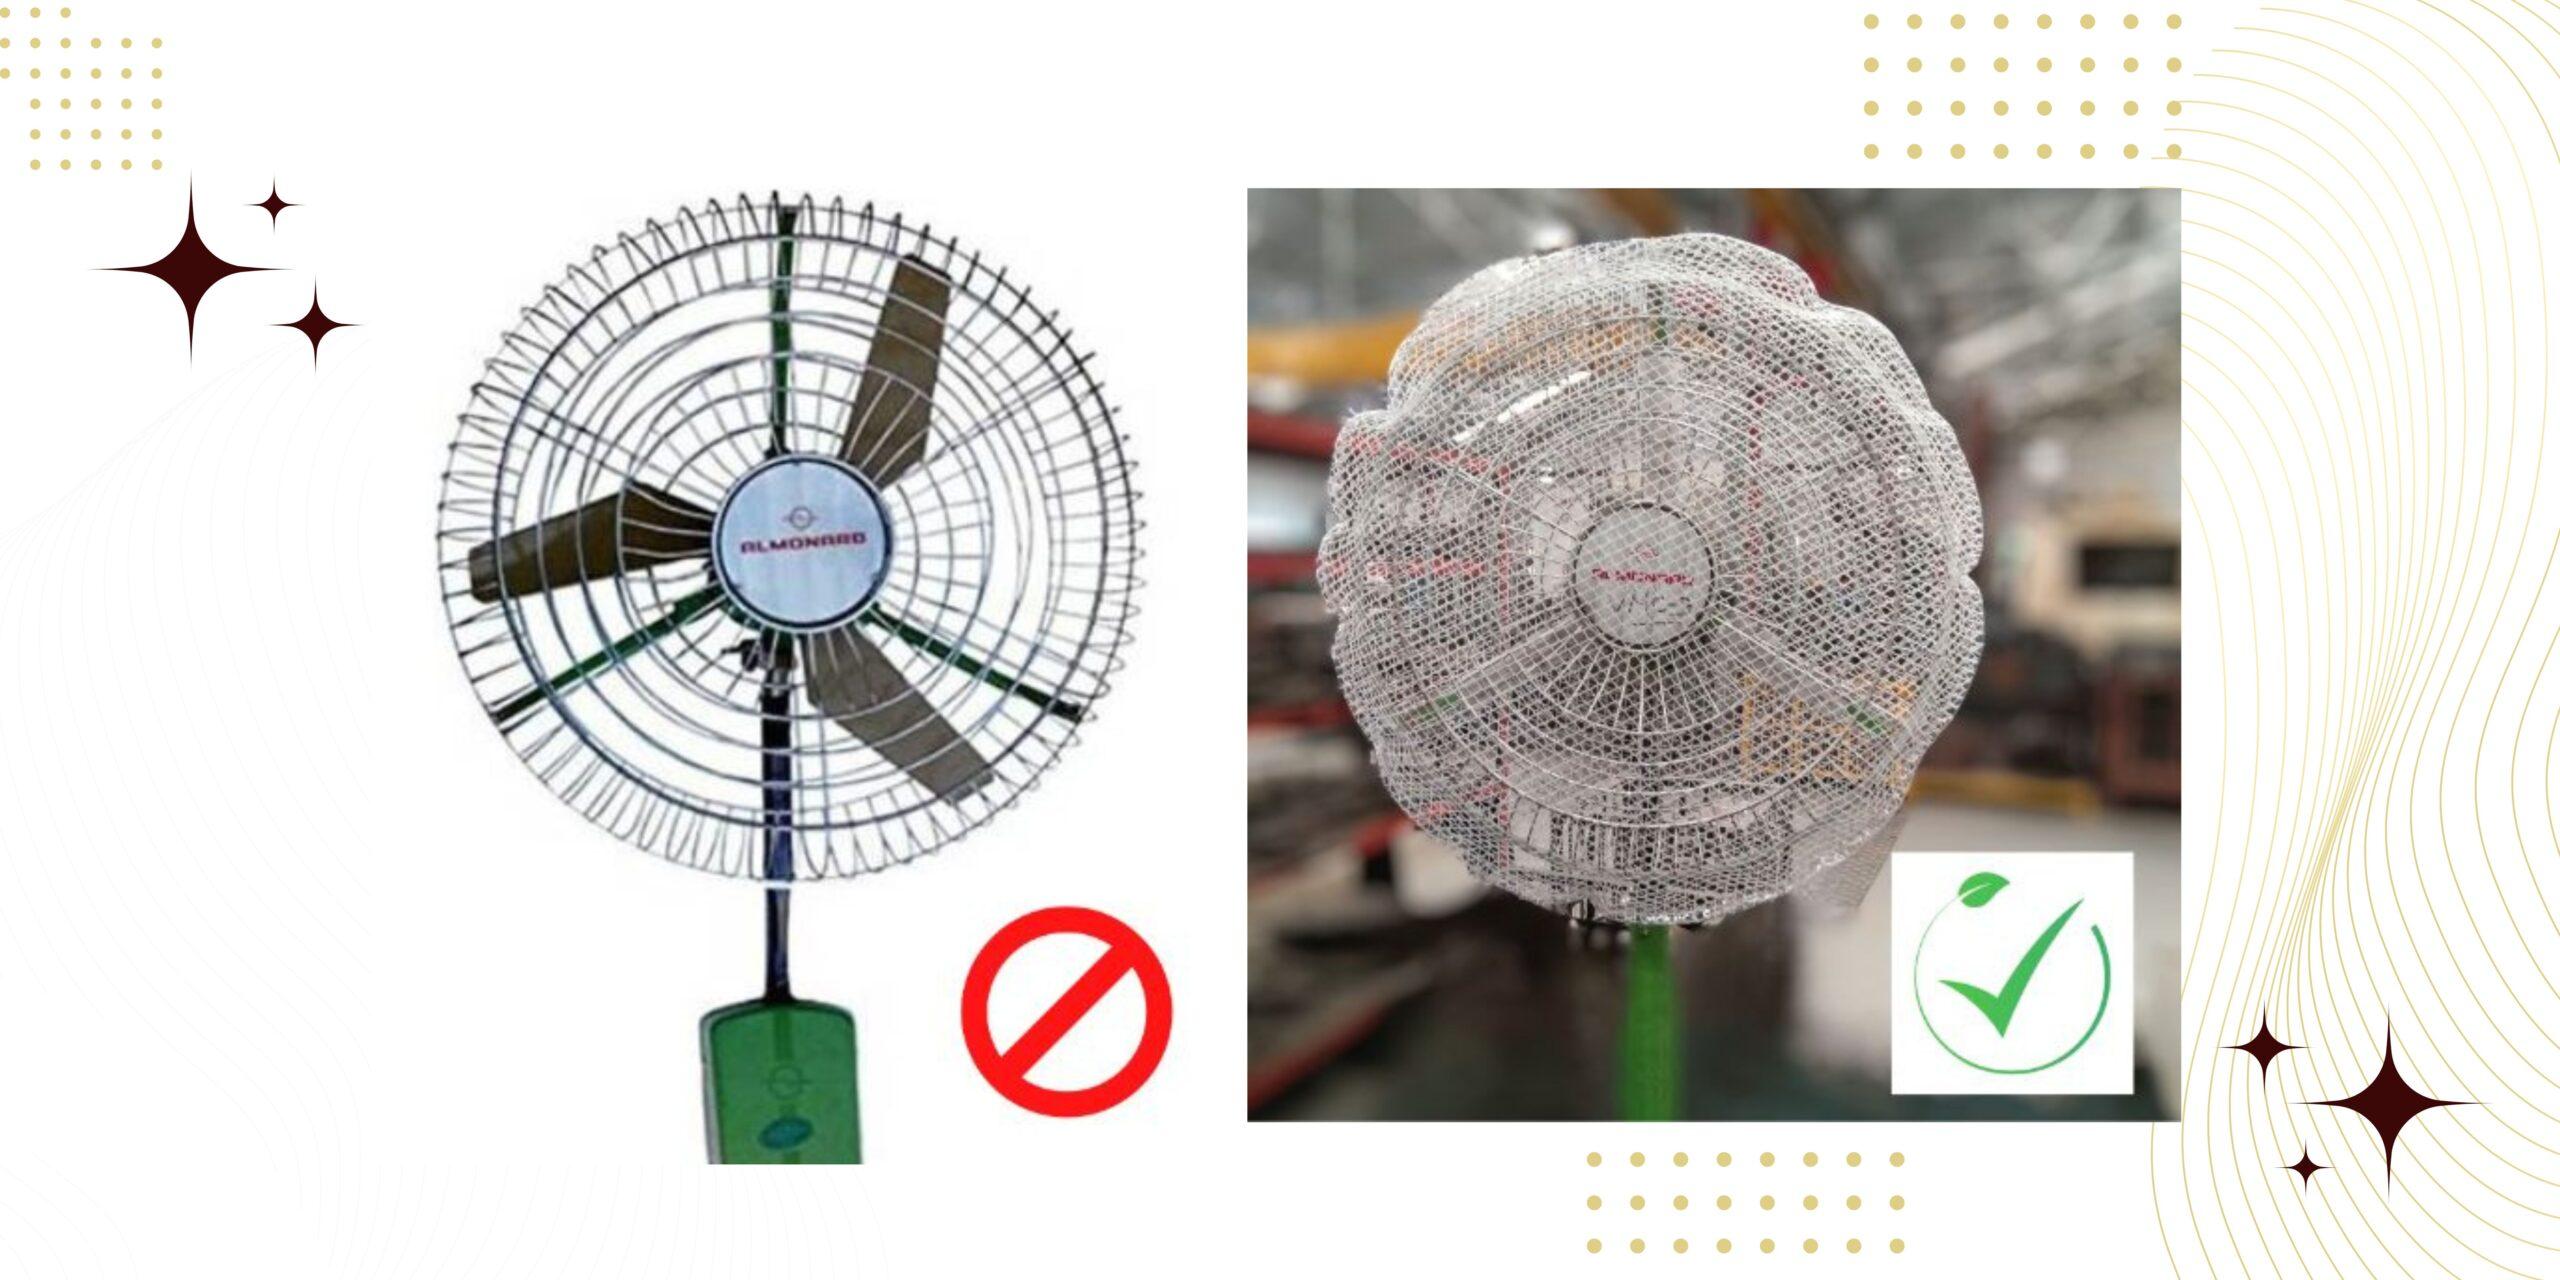 Industrial Fans Safety Guard